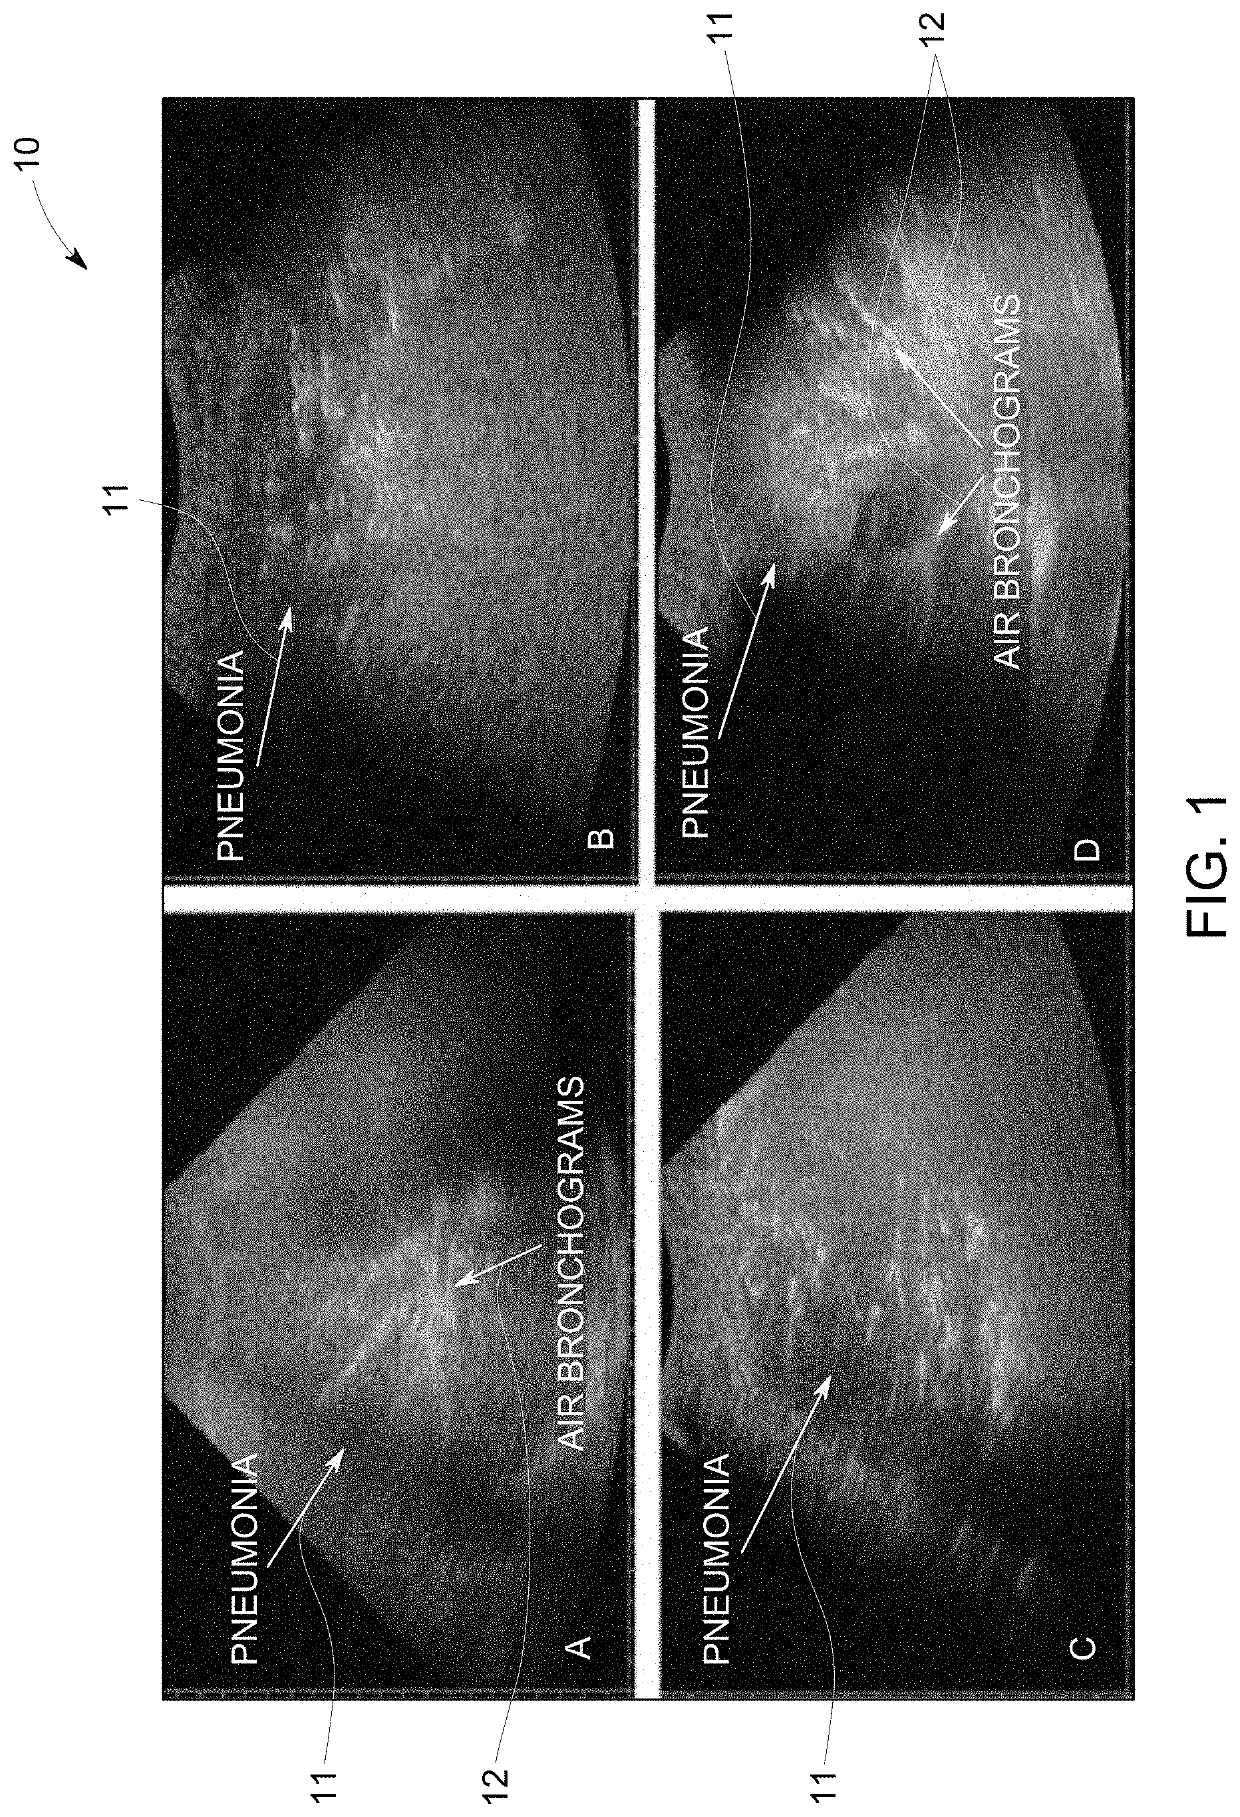 Guided lung coverage and automated detection using ultrasound devices